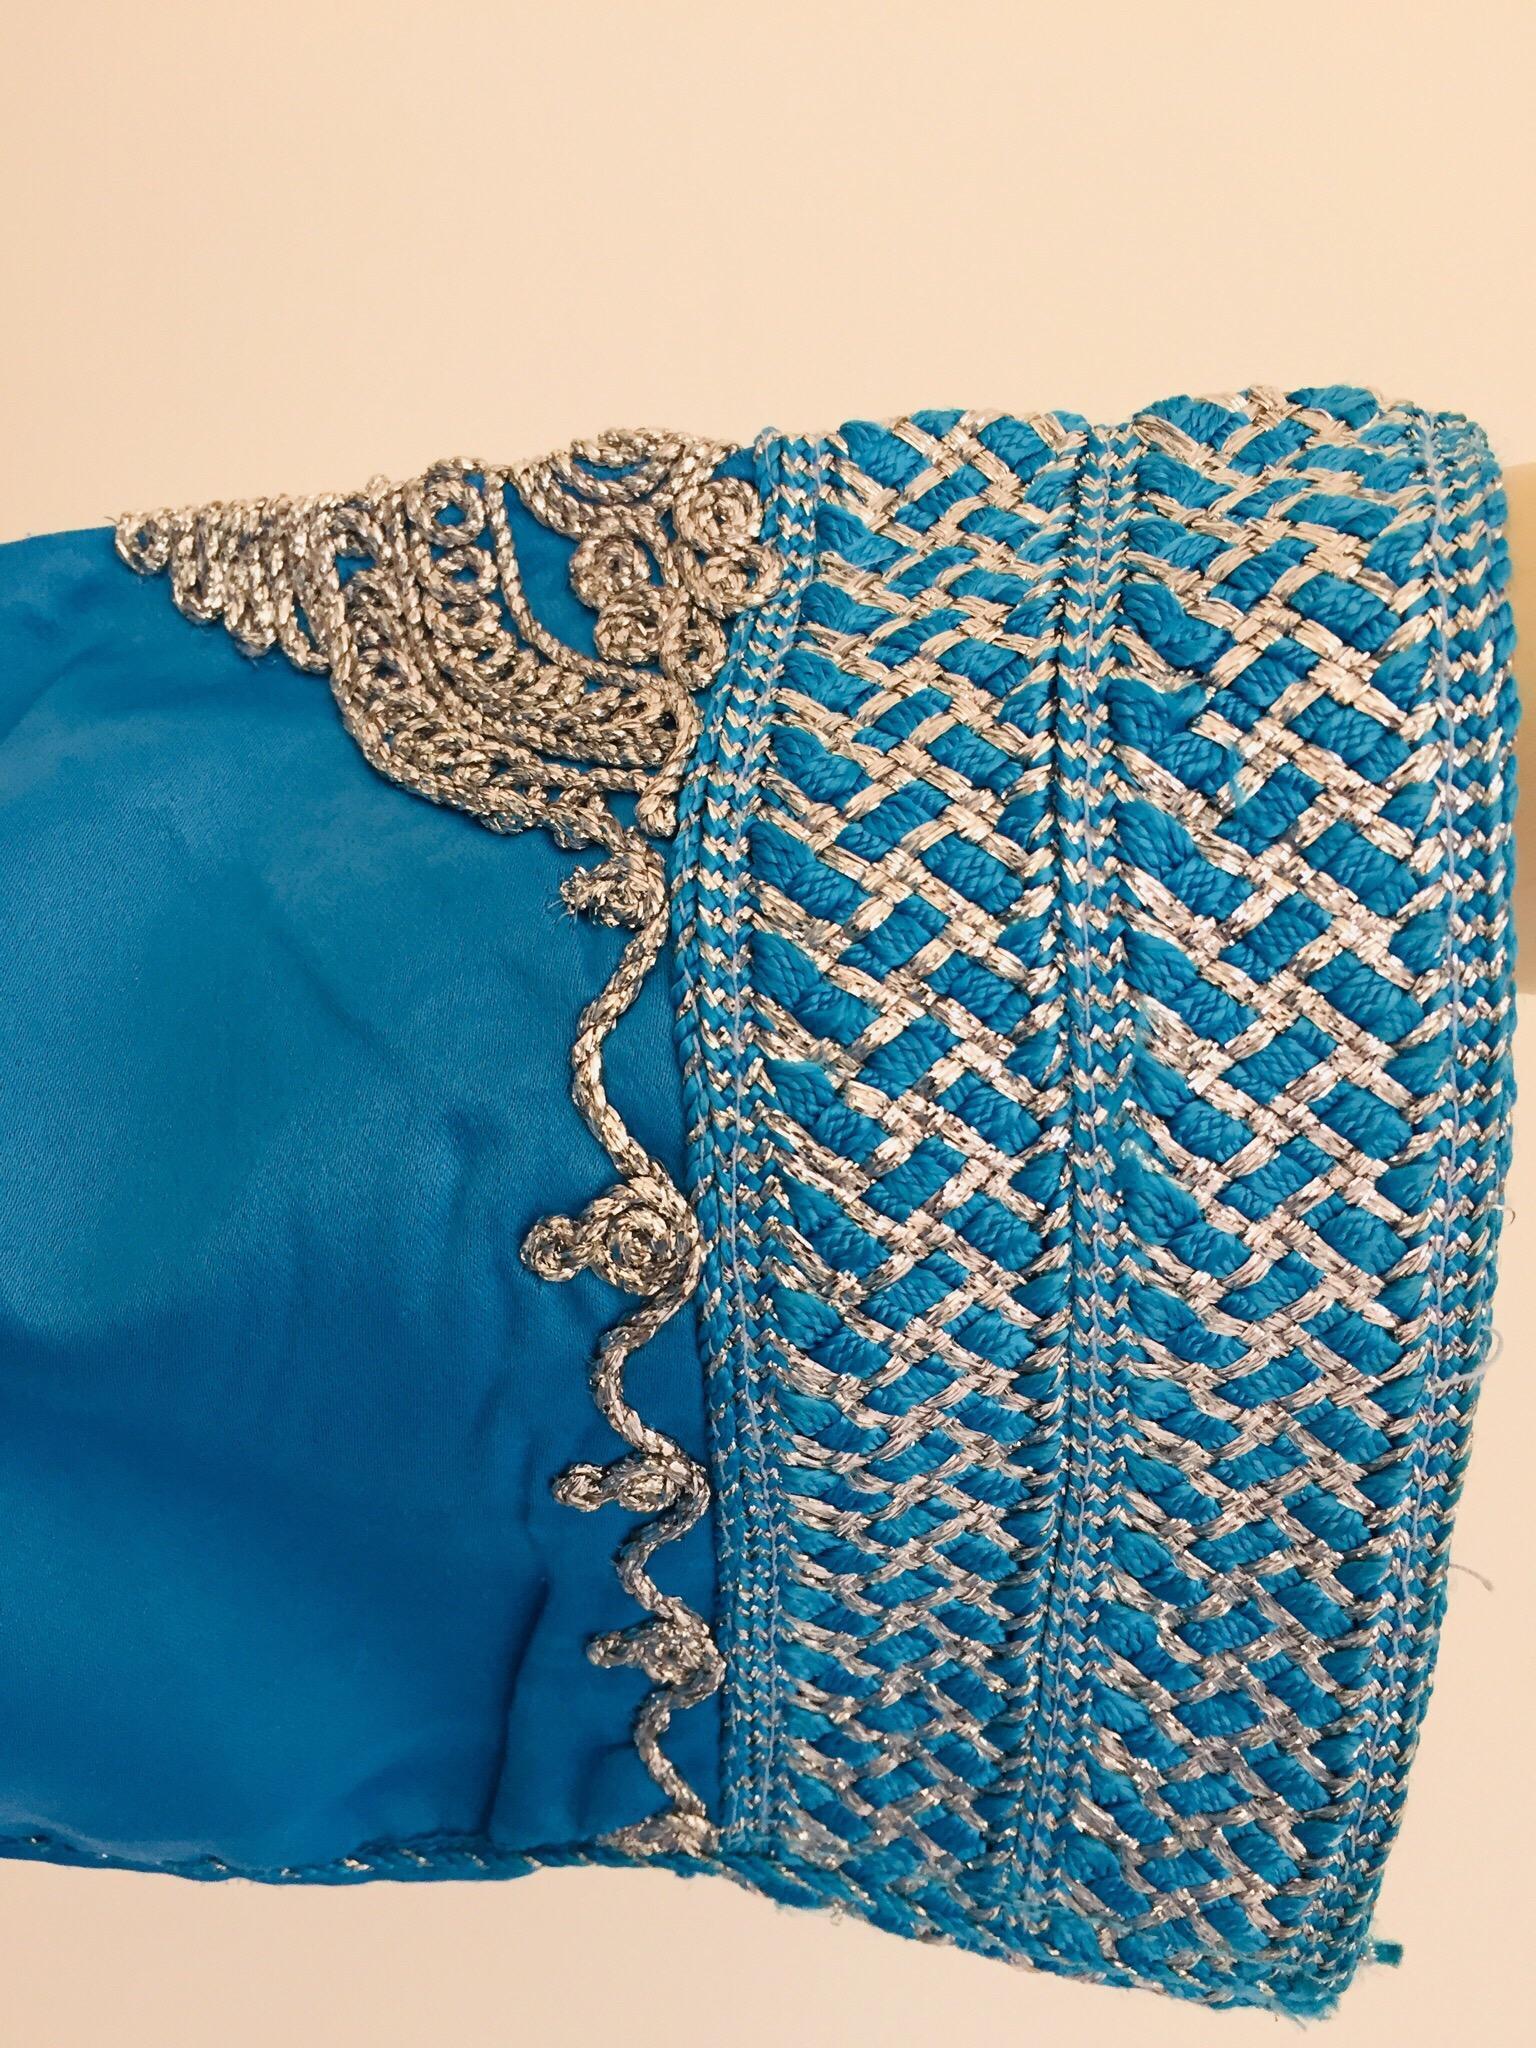 Moroccan Kaftan in Turquoise Blue and Silver For Sale 3